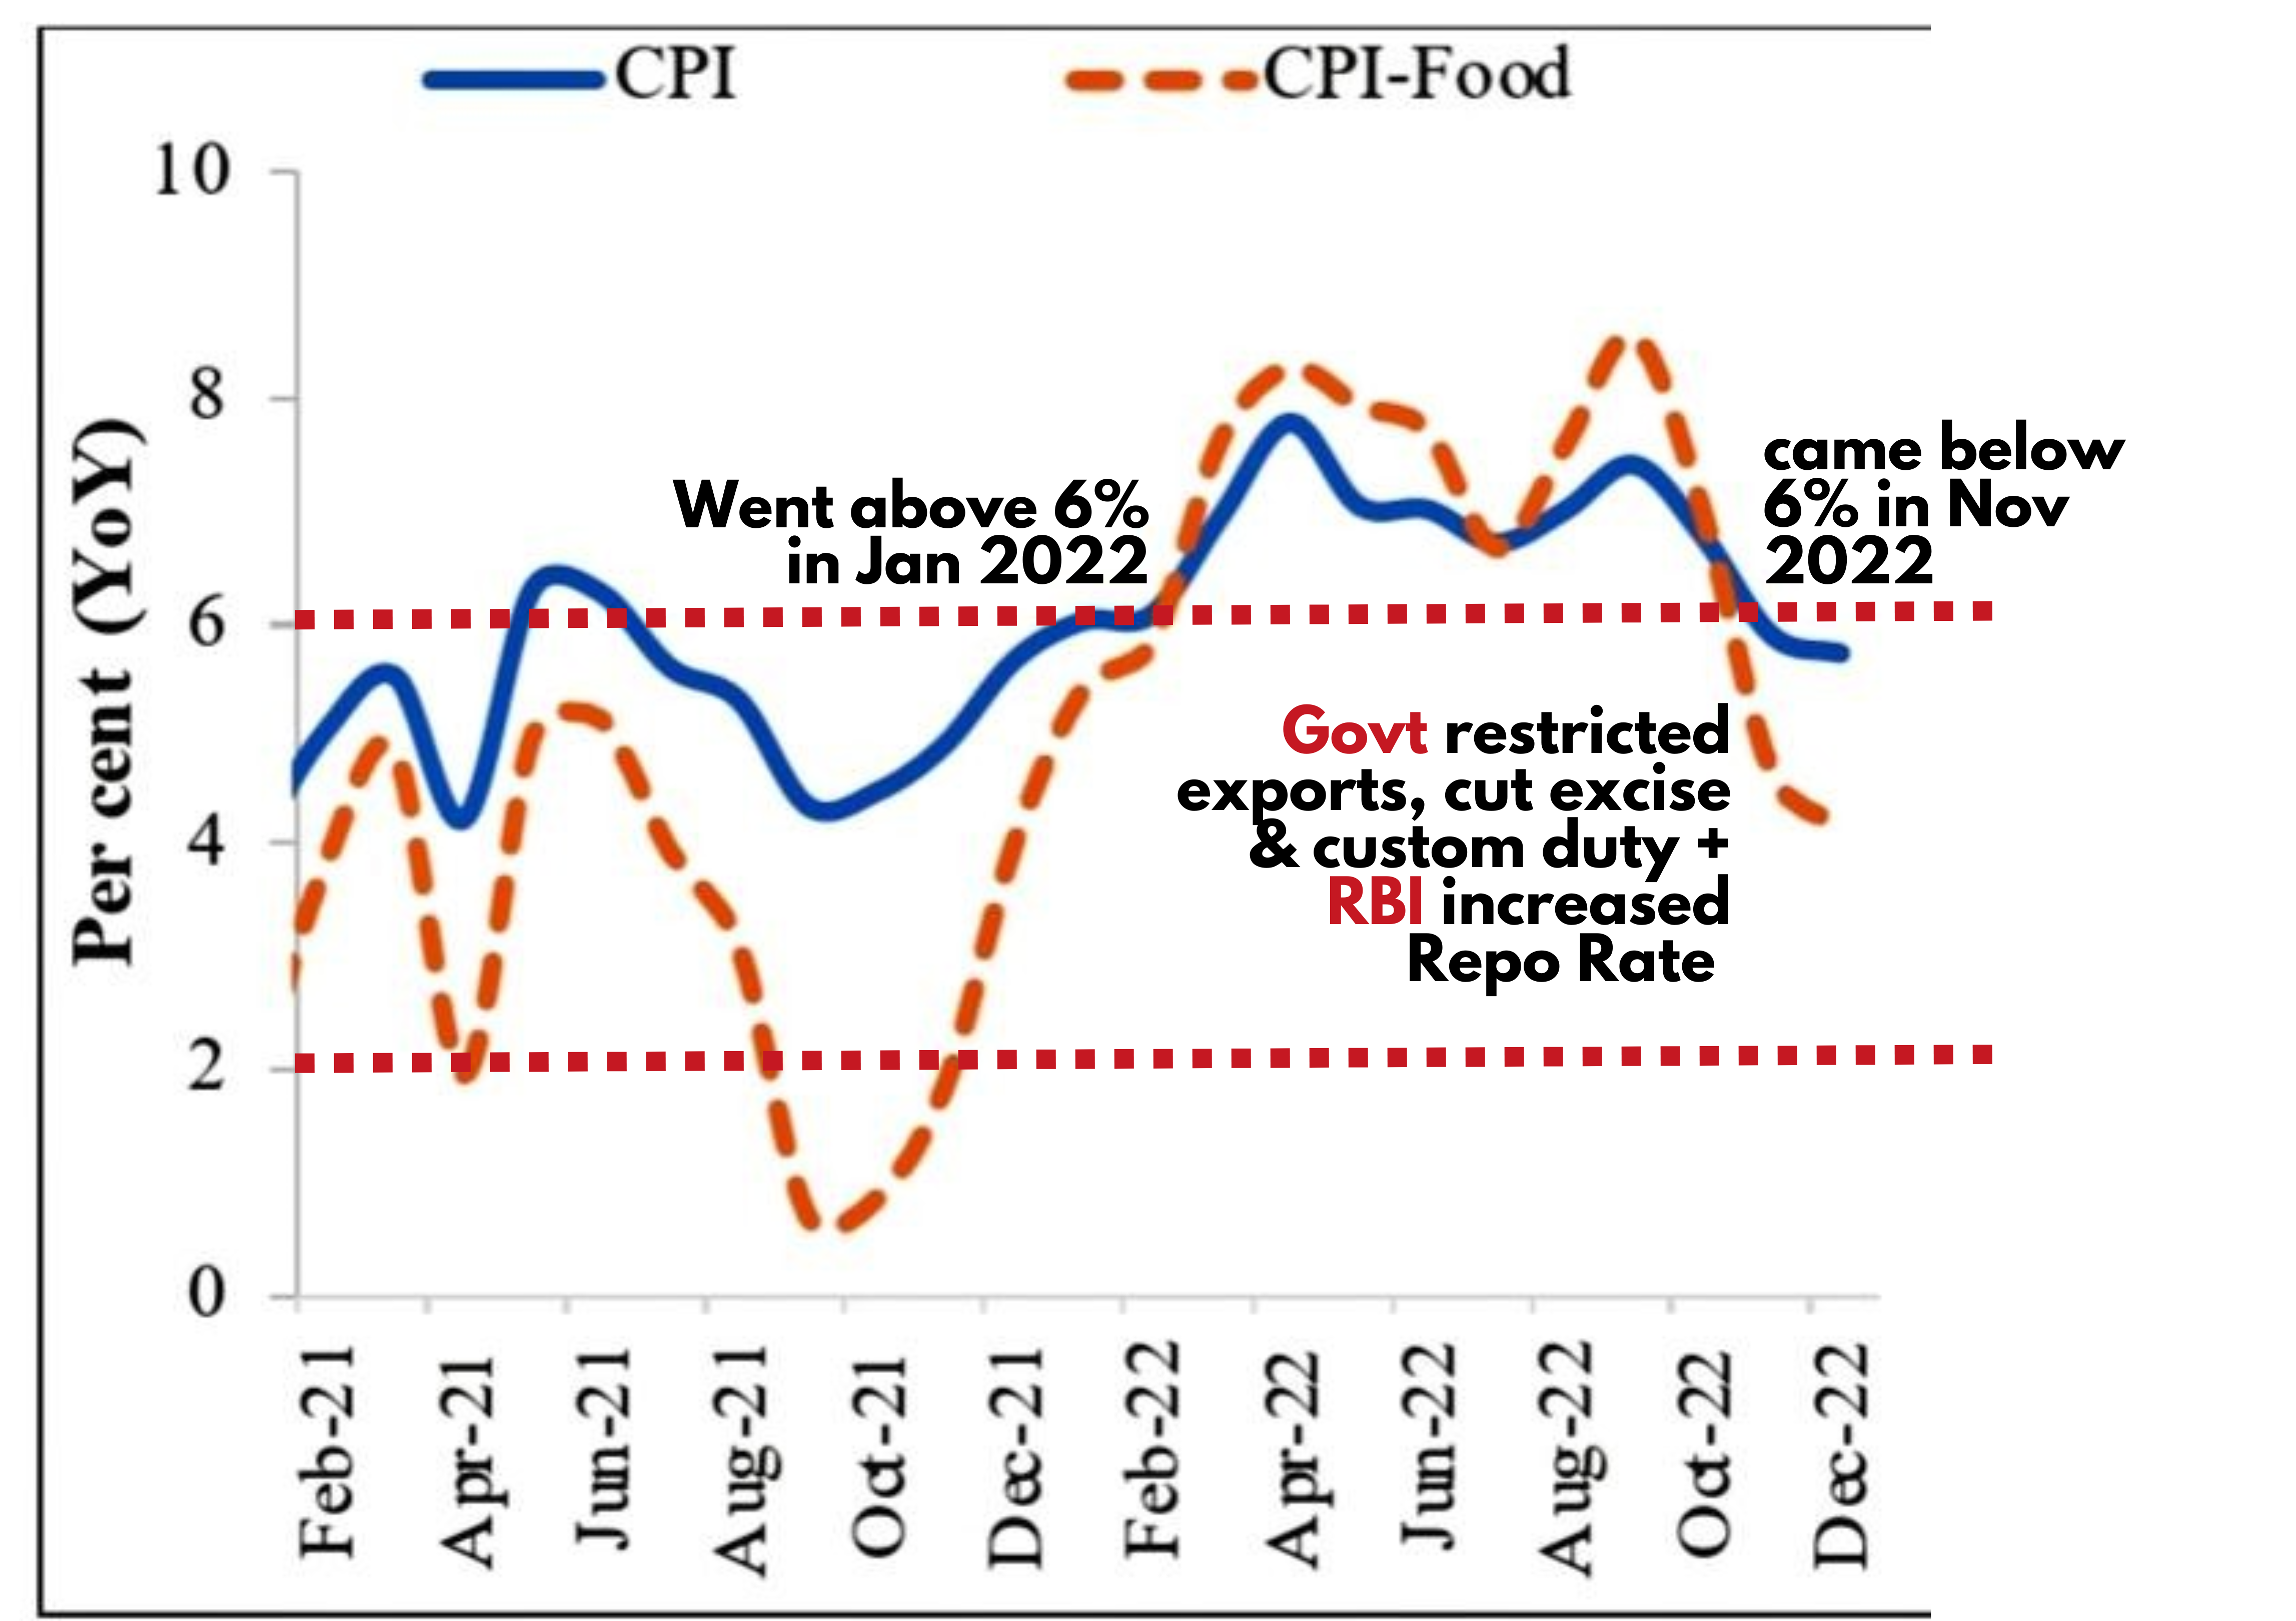 Trends in CPI in recent times